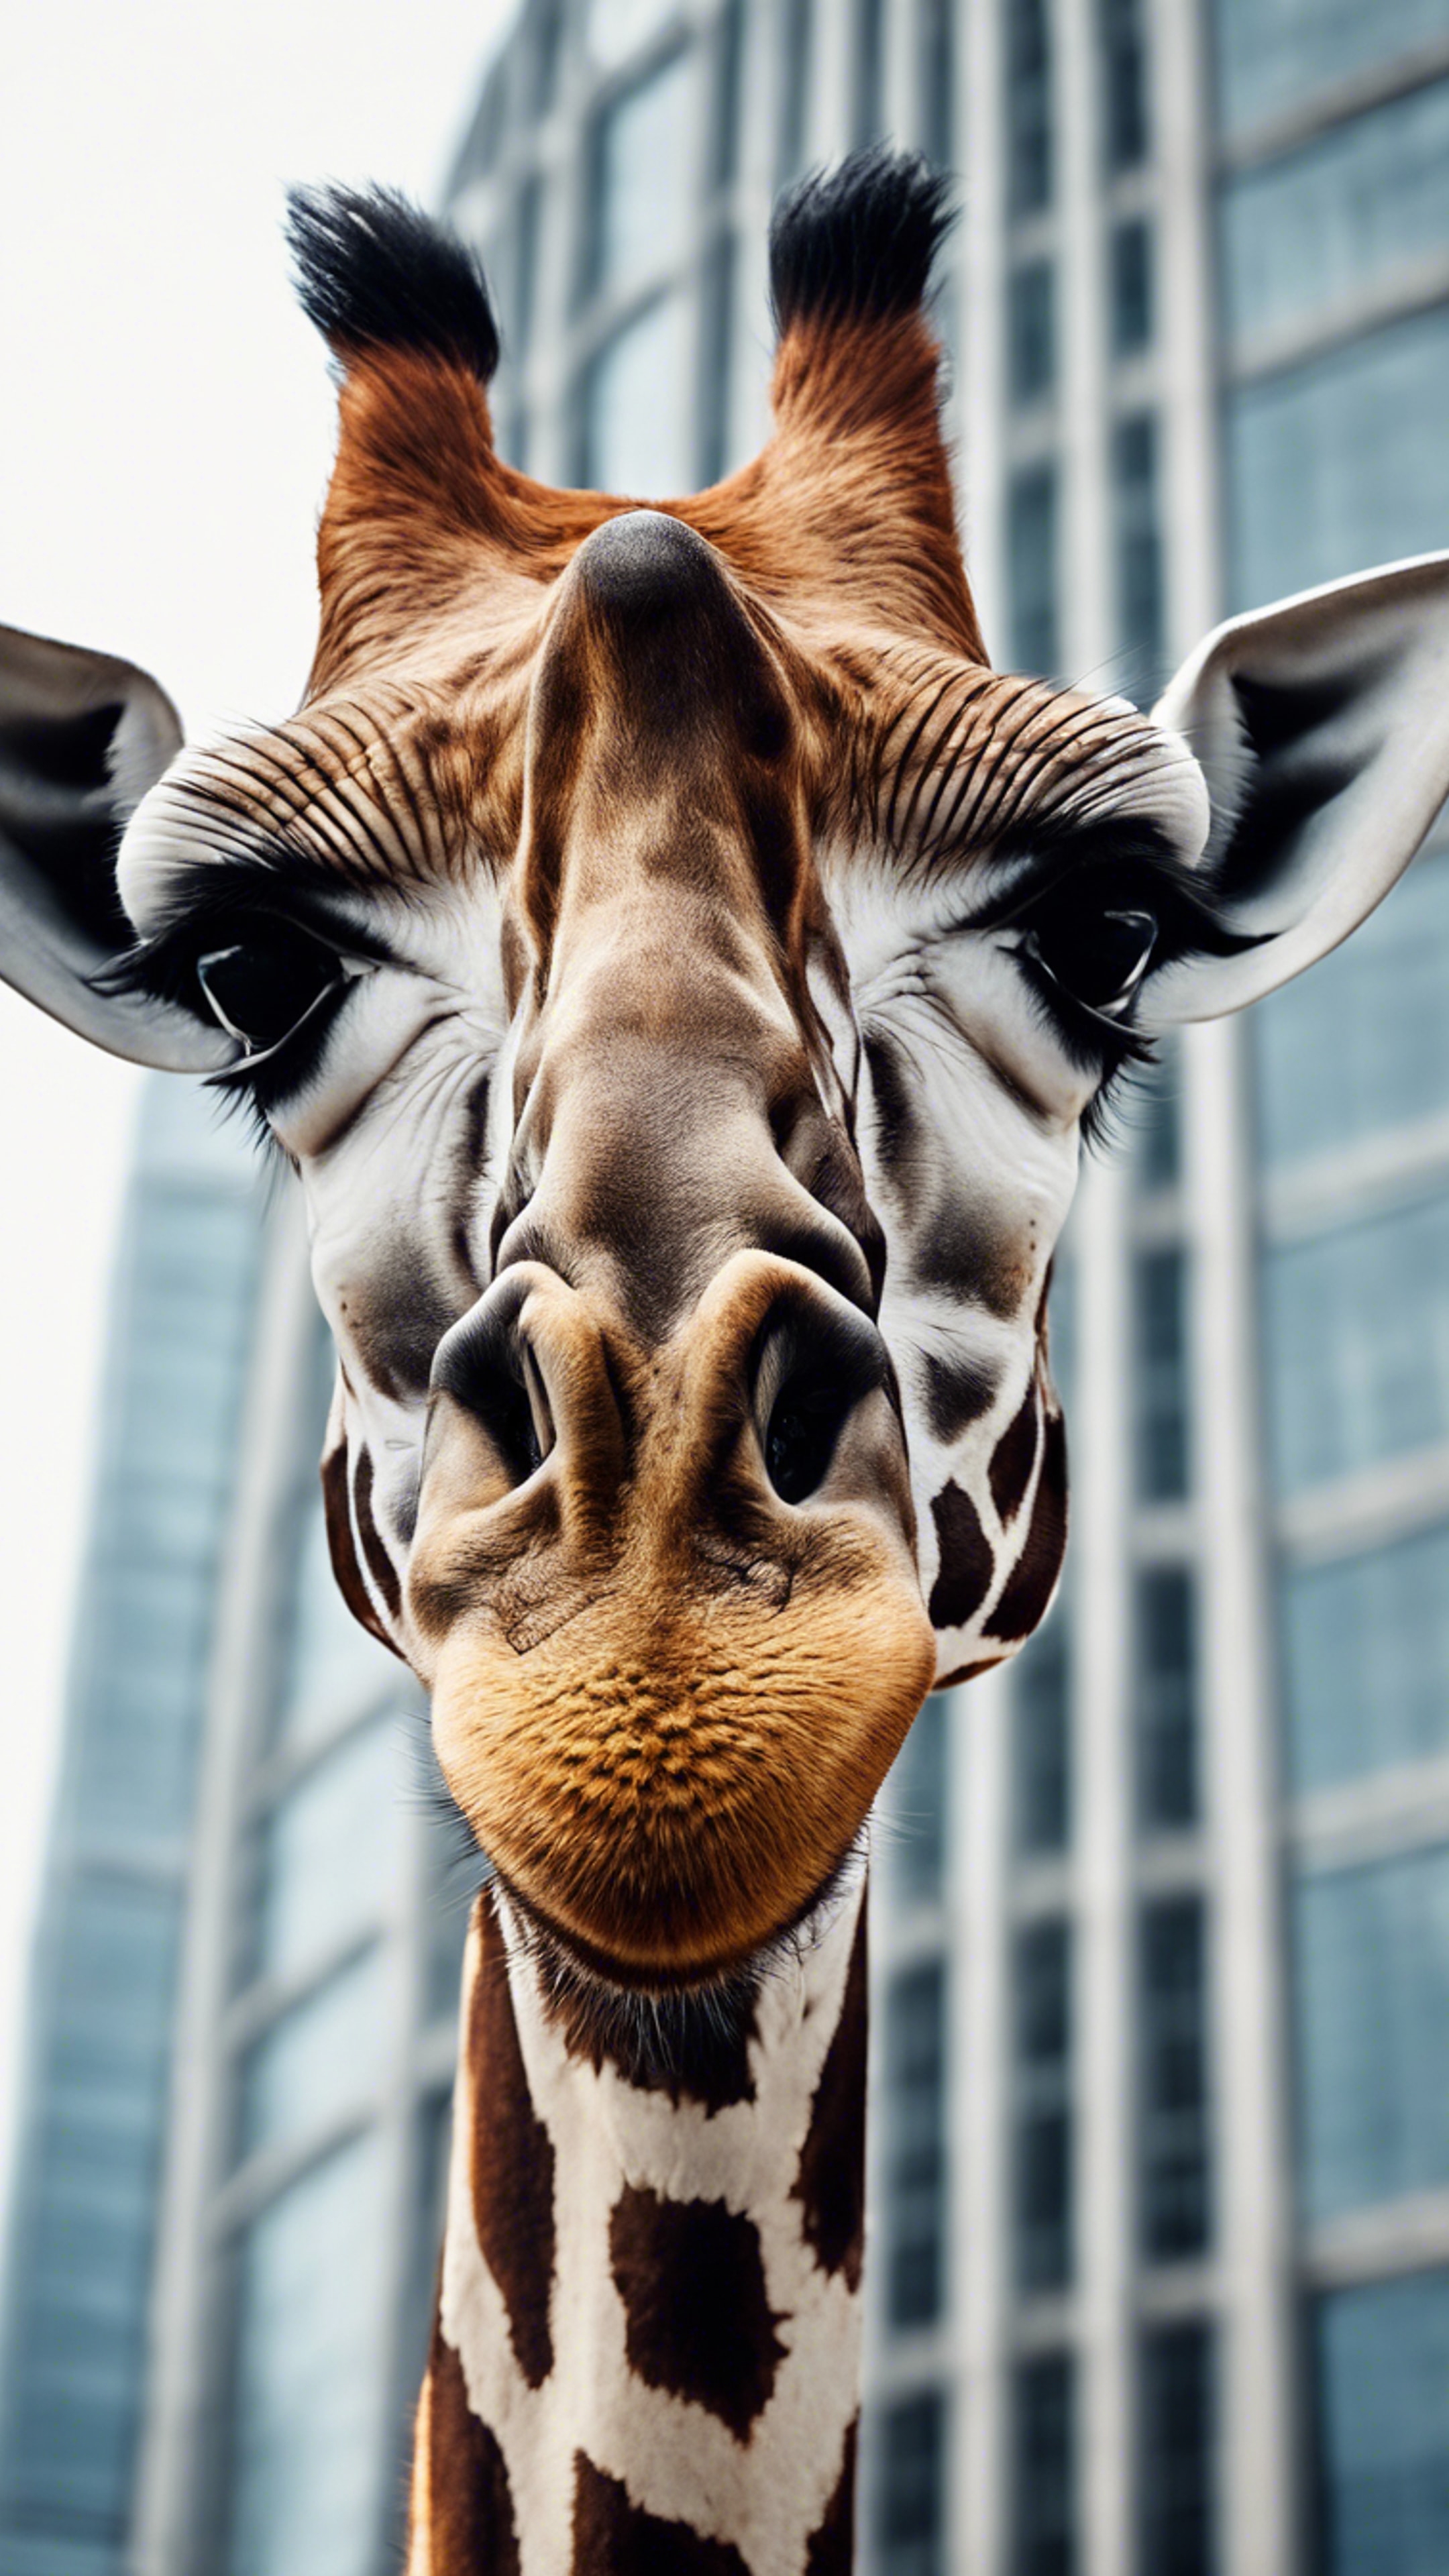 A giraffe in an urban setting, poking its head out from behind a skyscraper, symbolising wild nature confronting urbanisation. Hình nền[4646bbcdc786429d9f19]